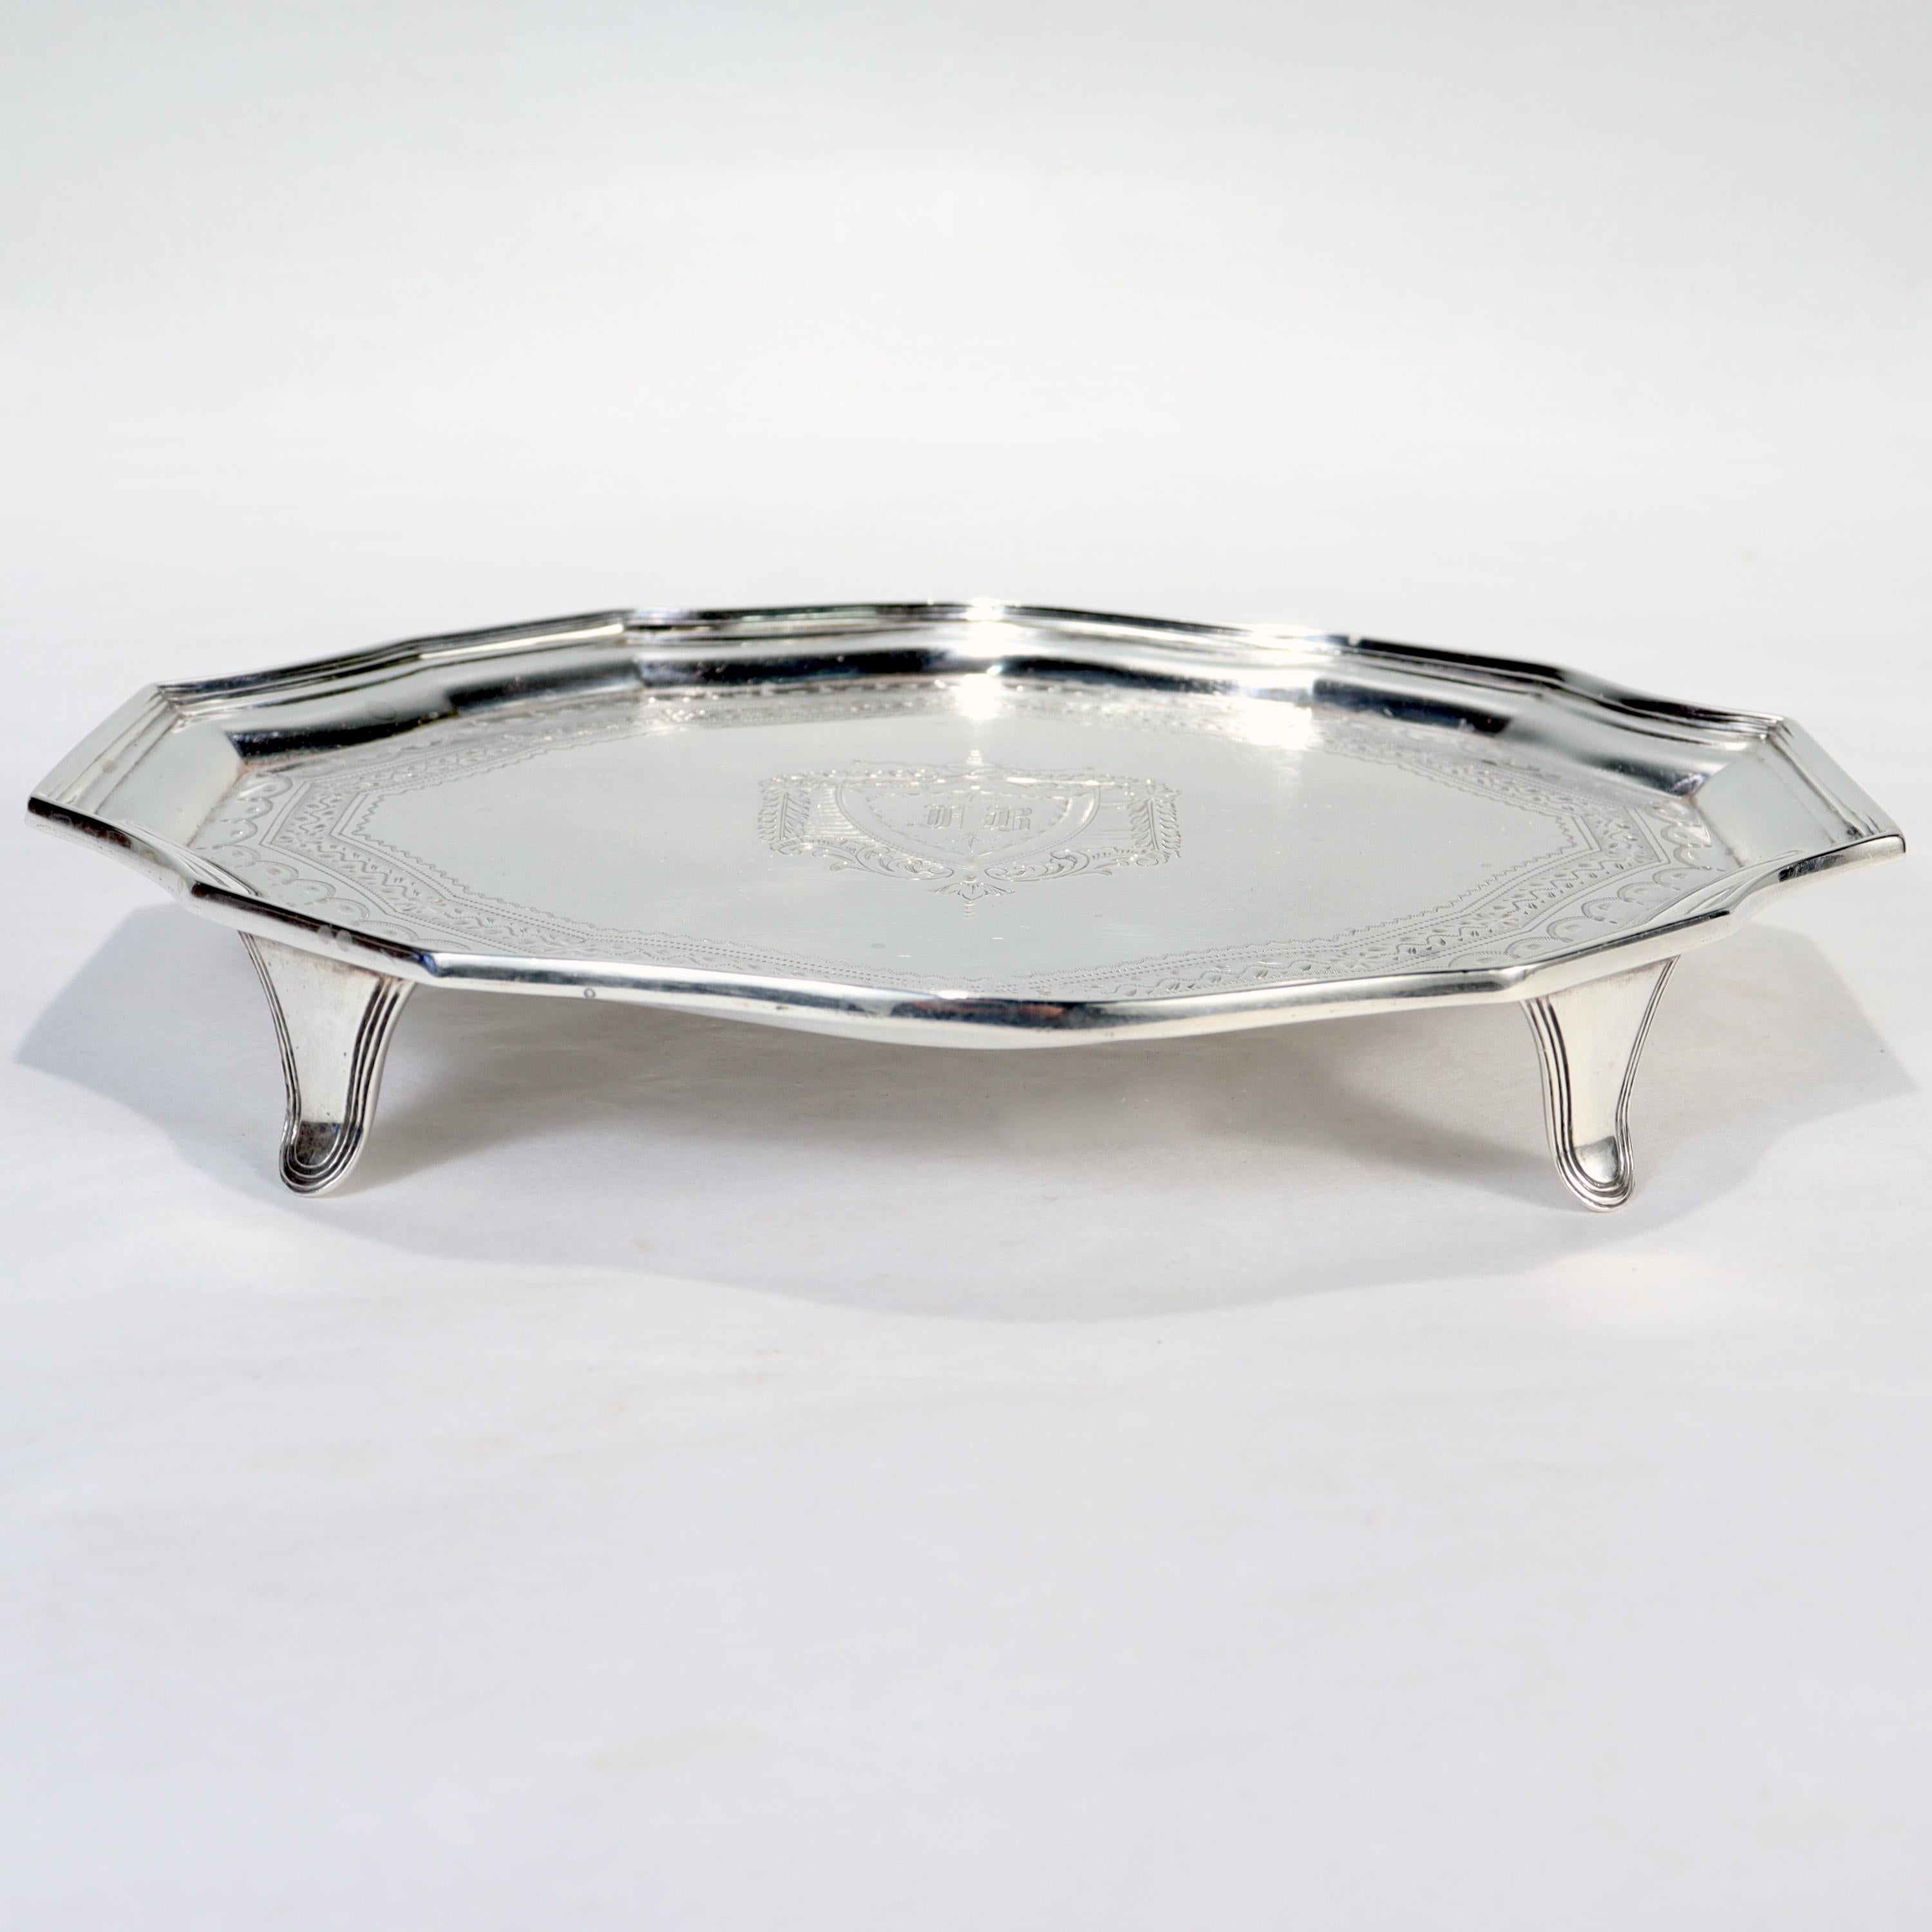 5 uses of silver salver